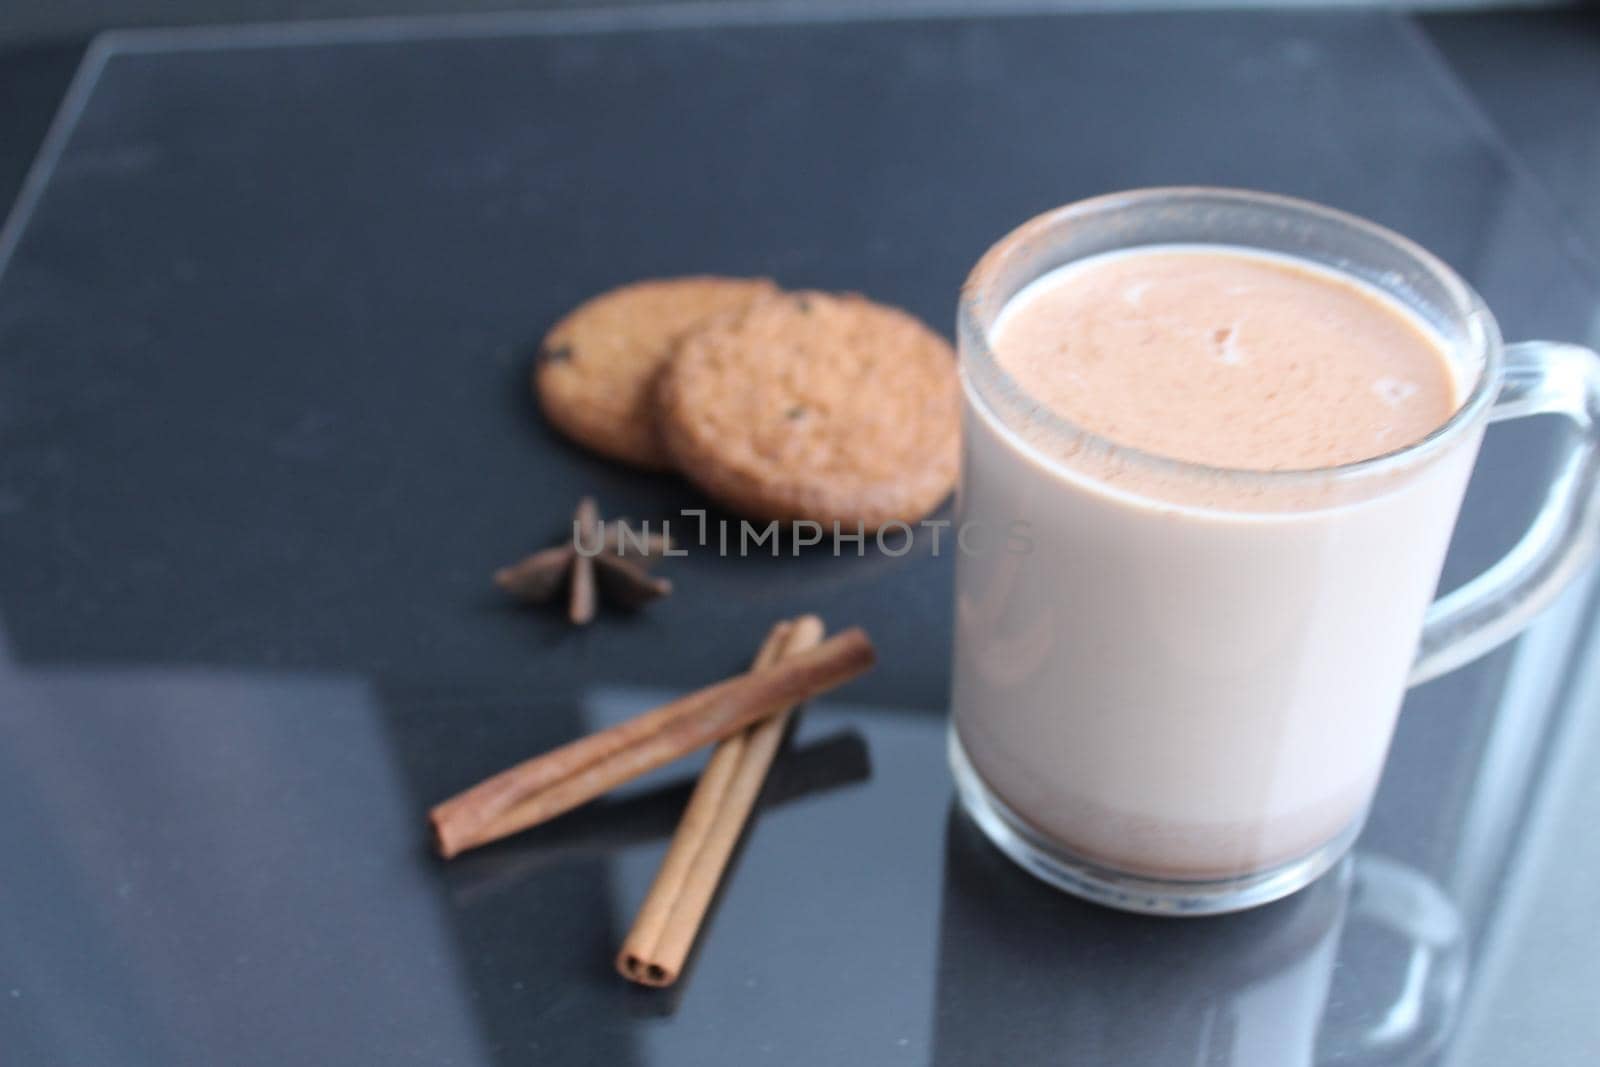 drink hot chocolate cocoa in a glass mug with cinnamon sticks and cookies on a black background with a place for text.